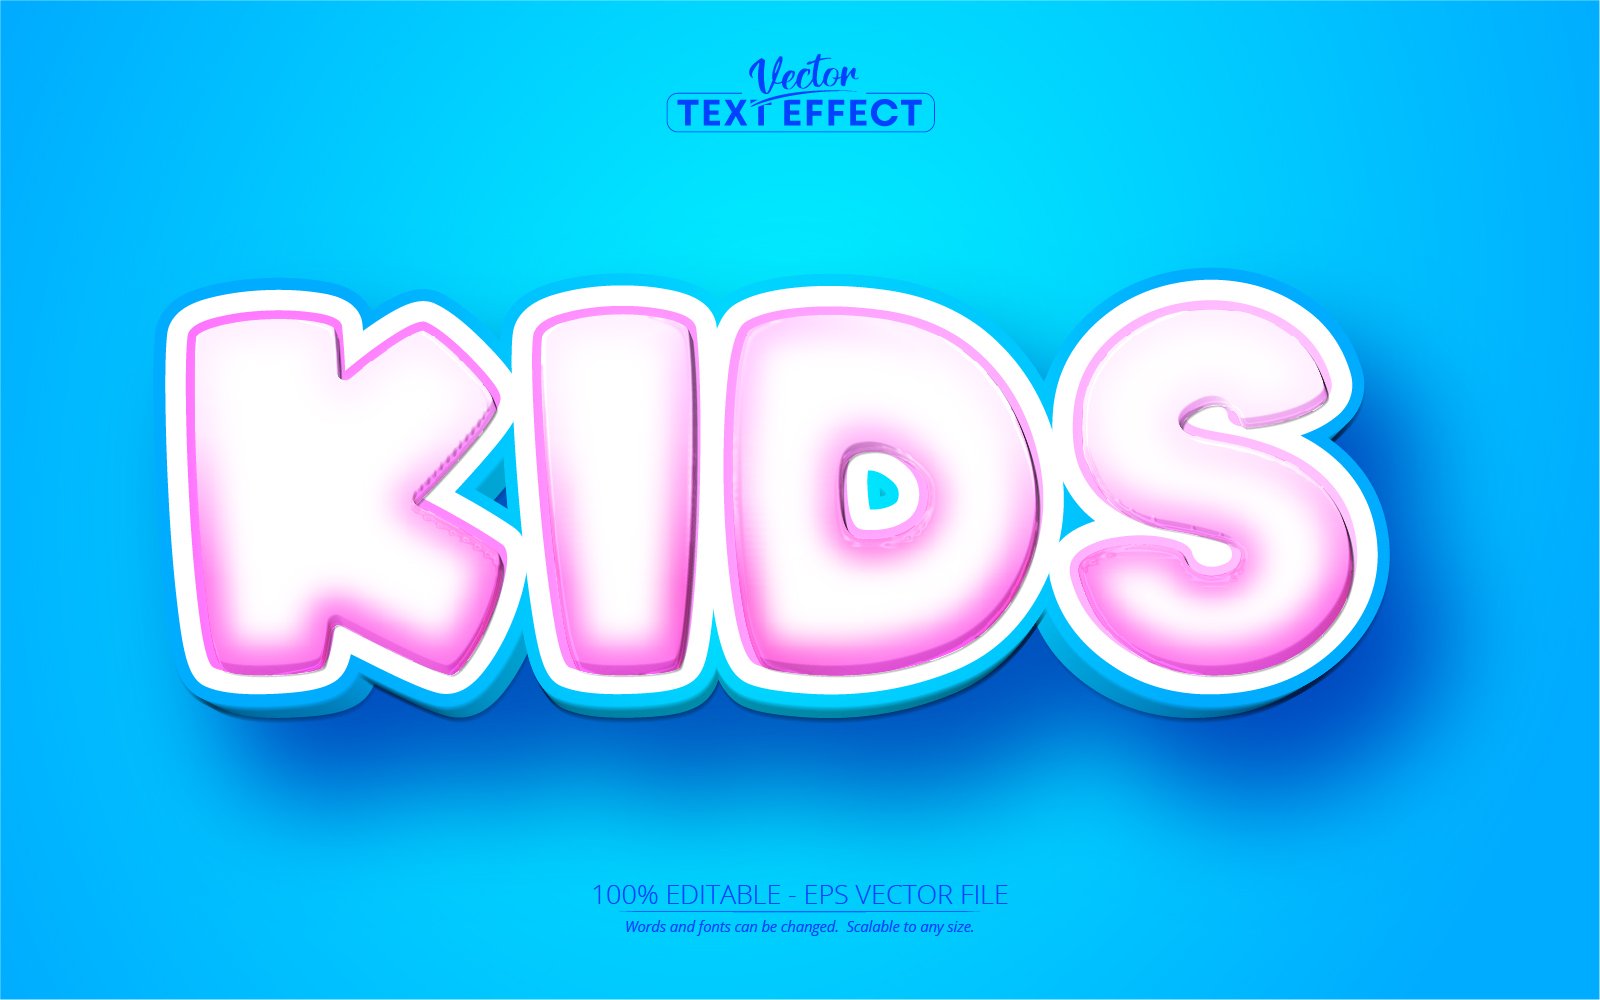 Kids - Editable Text Effect, Pink And Cartoon Text Style, Graphics Illustration